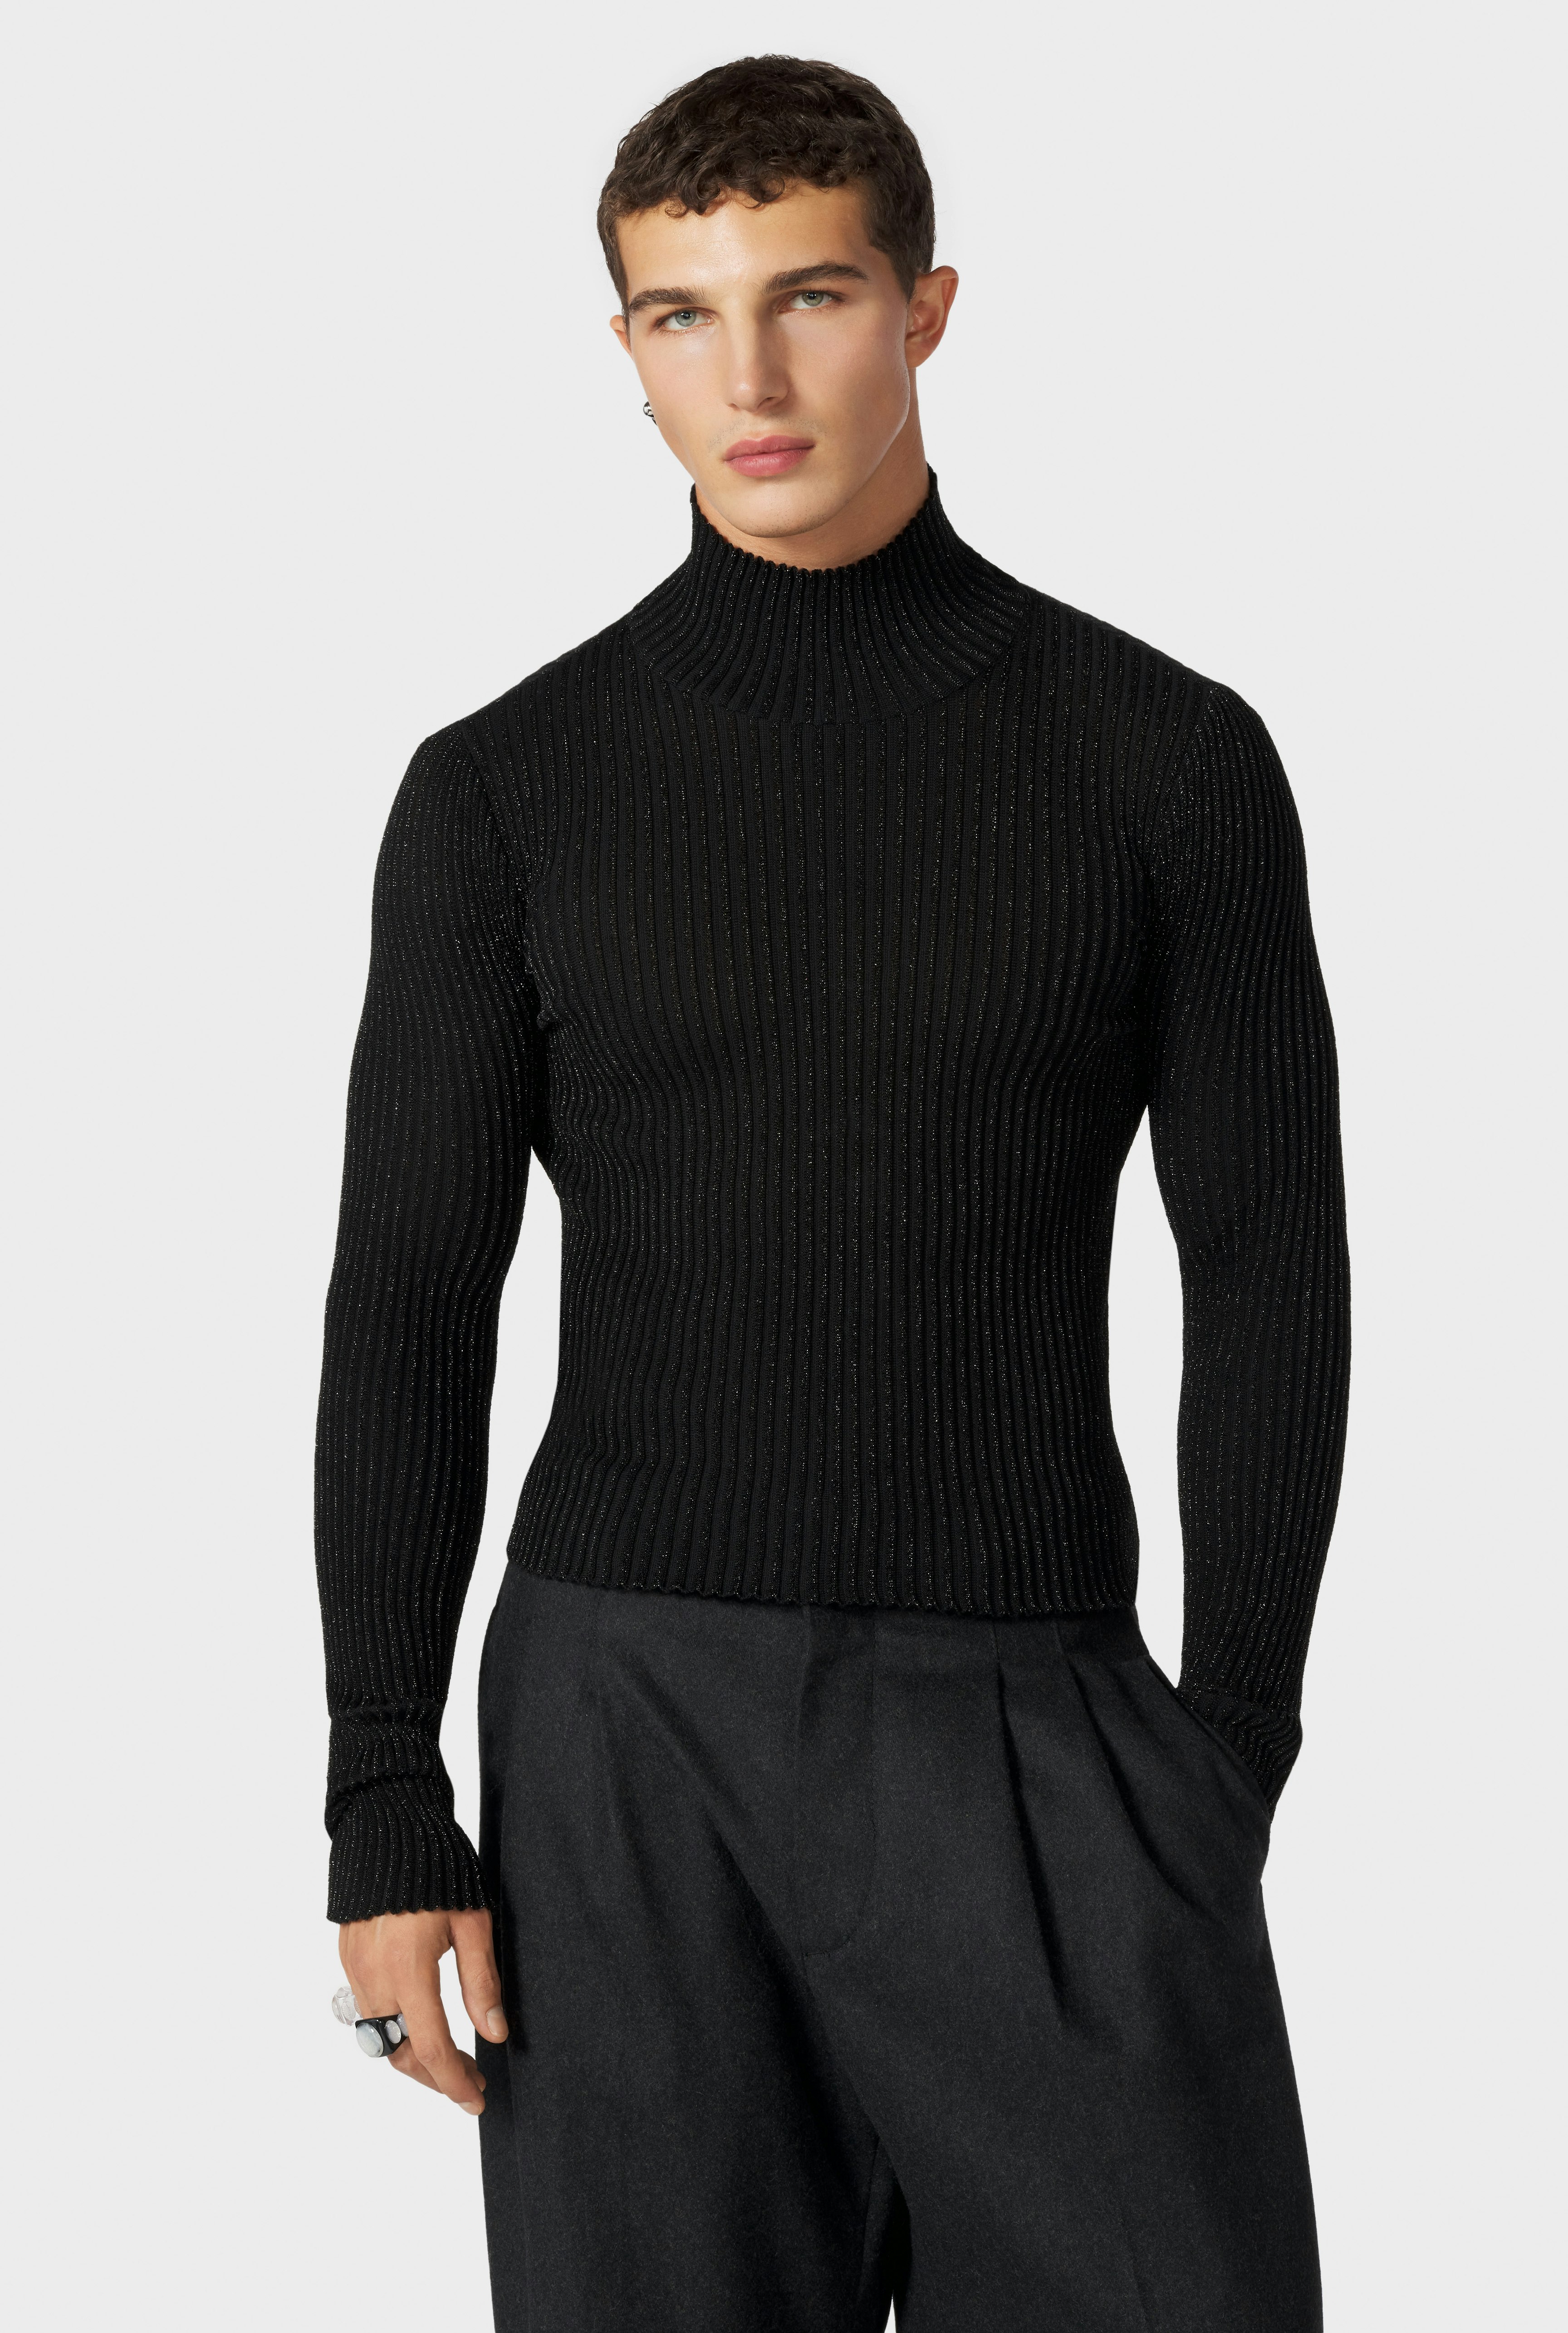 The Black Cyber Knit Top